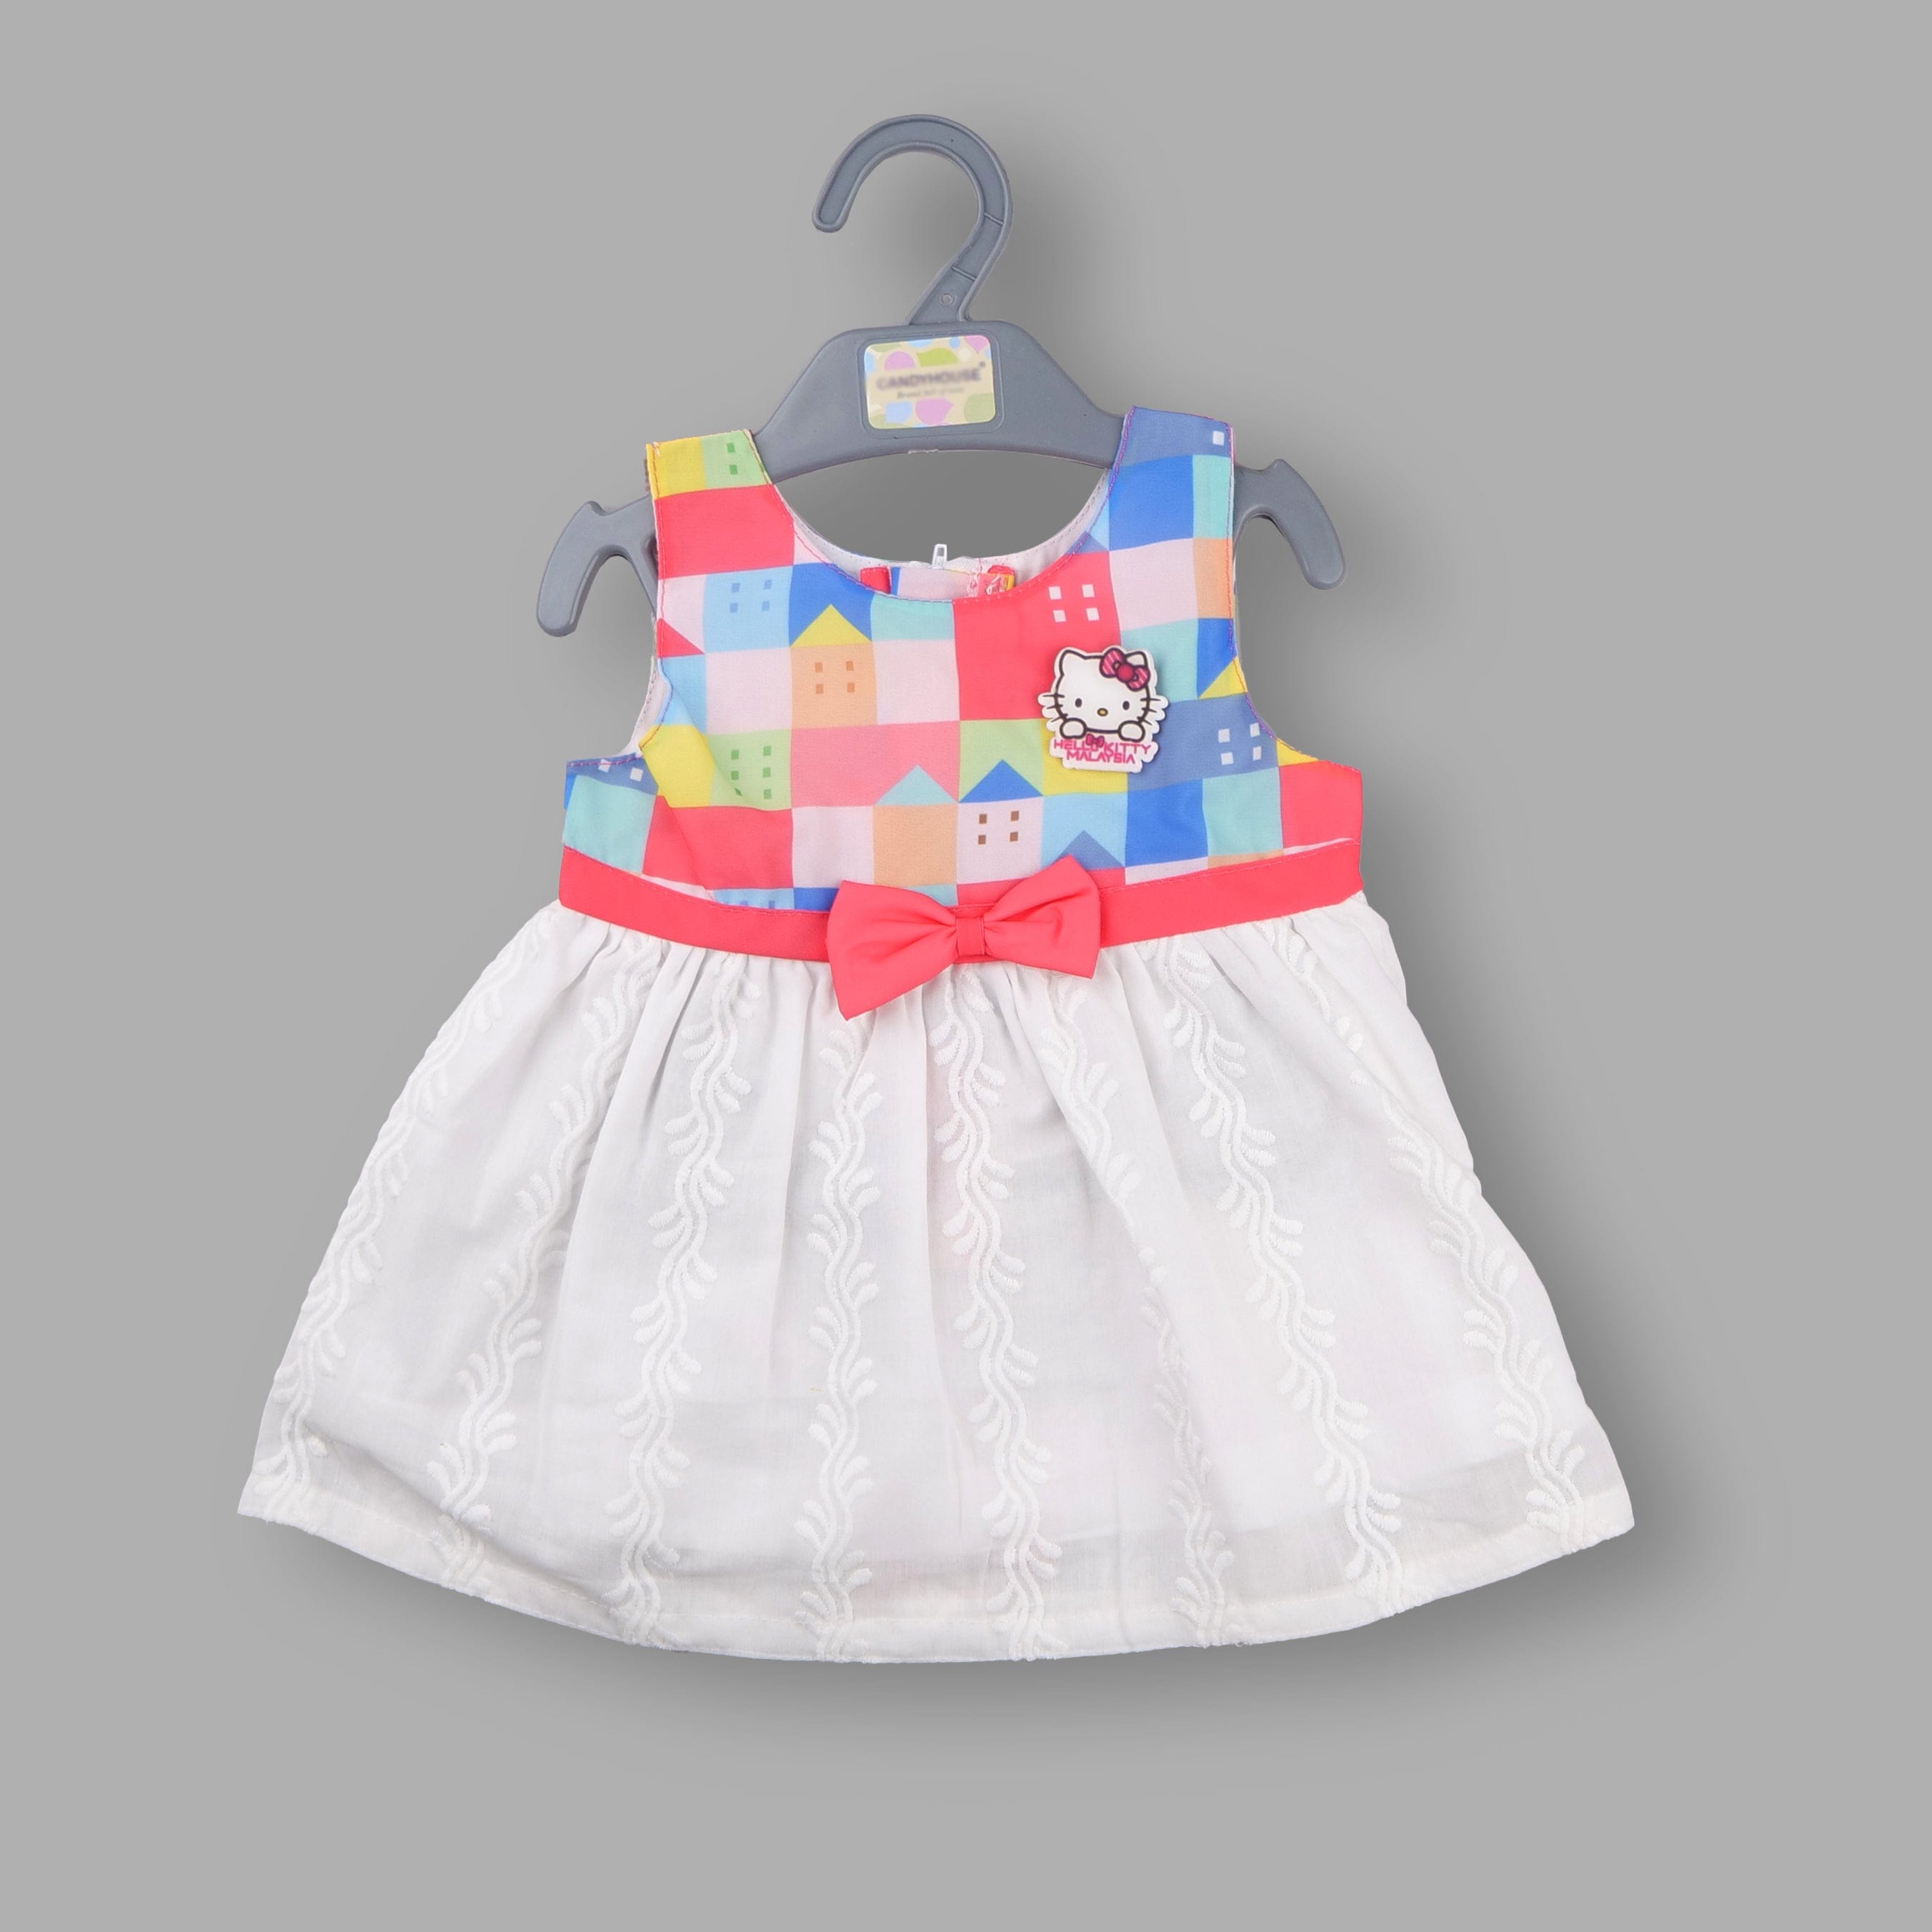 Buy Prince Princess Girl Party Dress Online - Get 38% Off